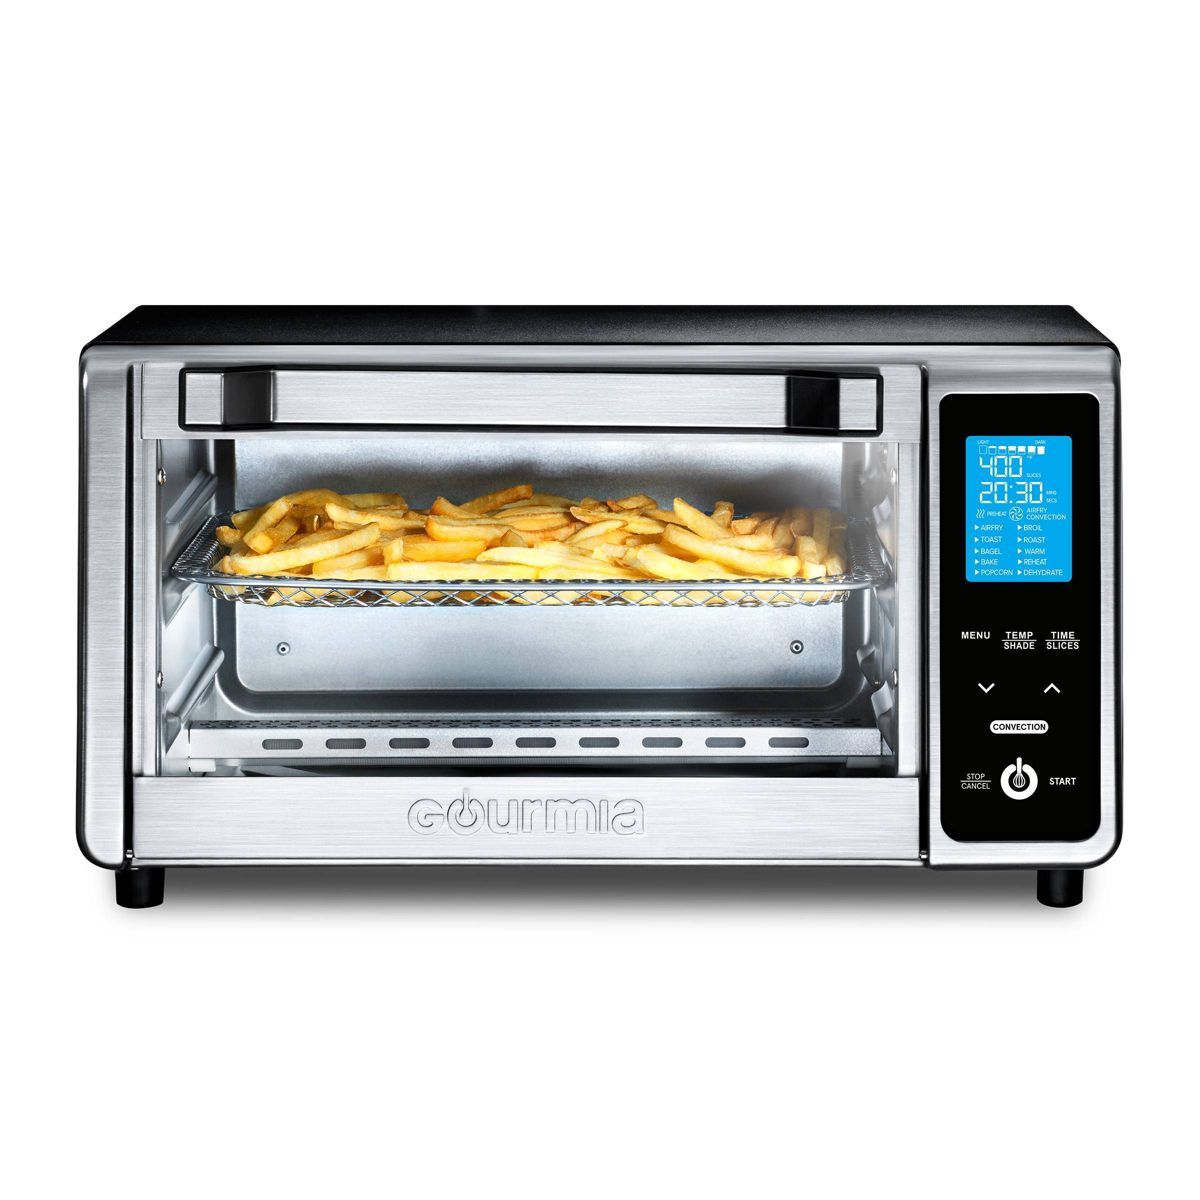 Gourmia Digital 4-Slice Toaster Oven Air Fryer with 11 Cooking Functions Stainless Steel Gray | Target